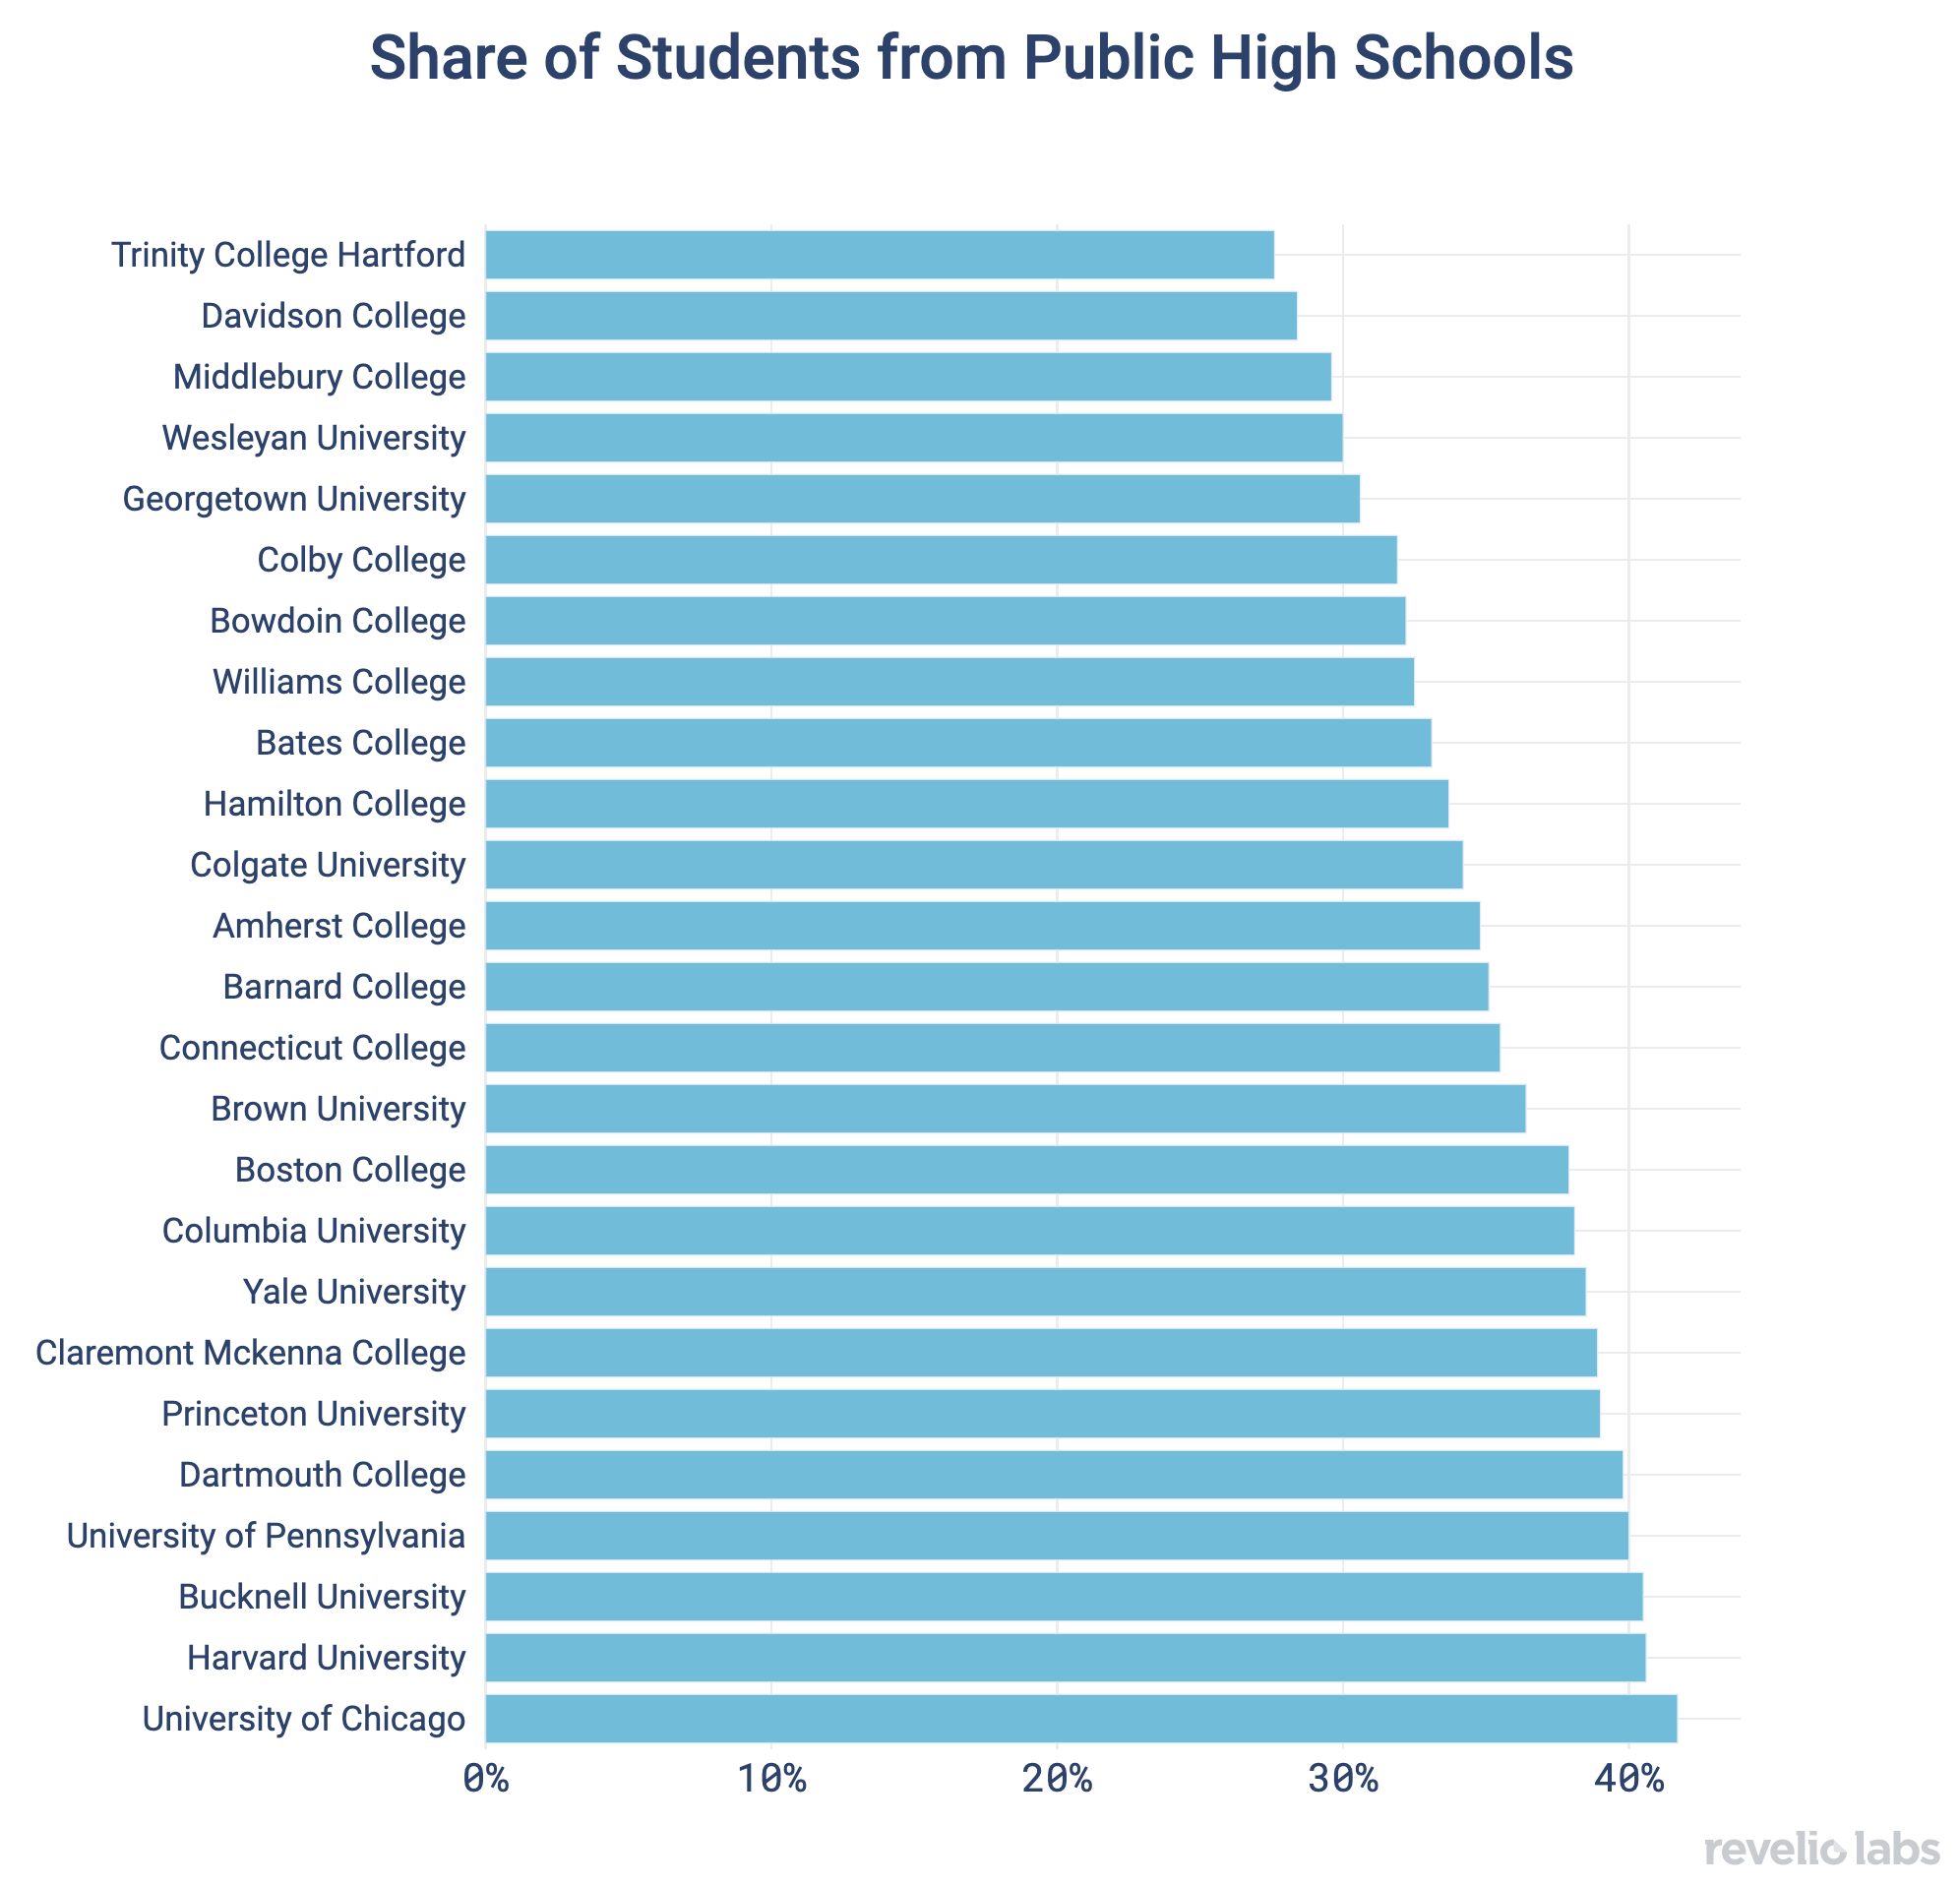 Share of Students from Public High Schools